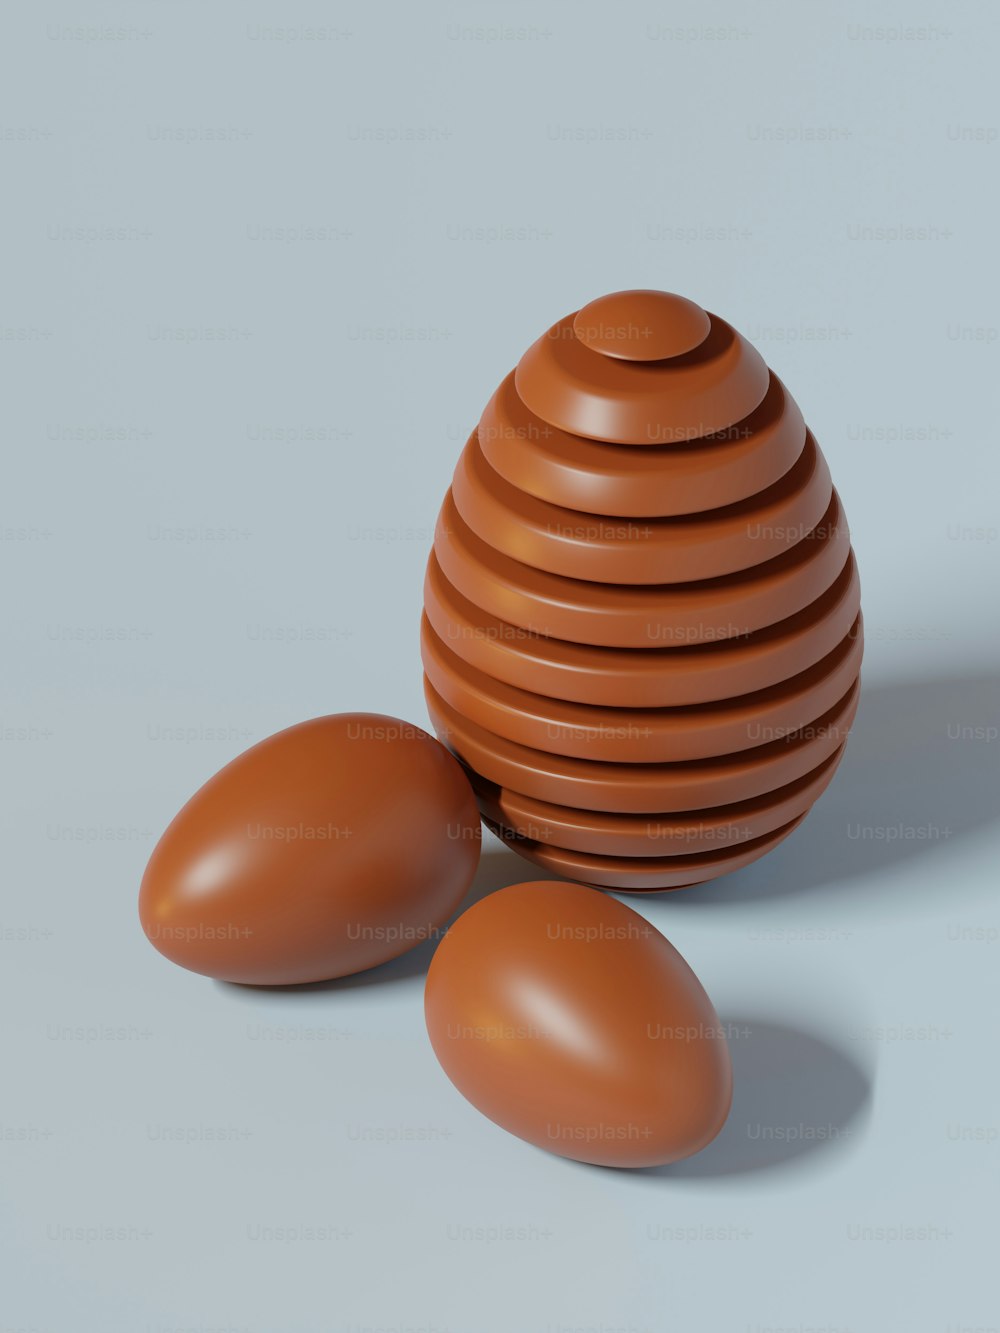 a brown egg sitting on top of a pile of brown eggs